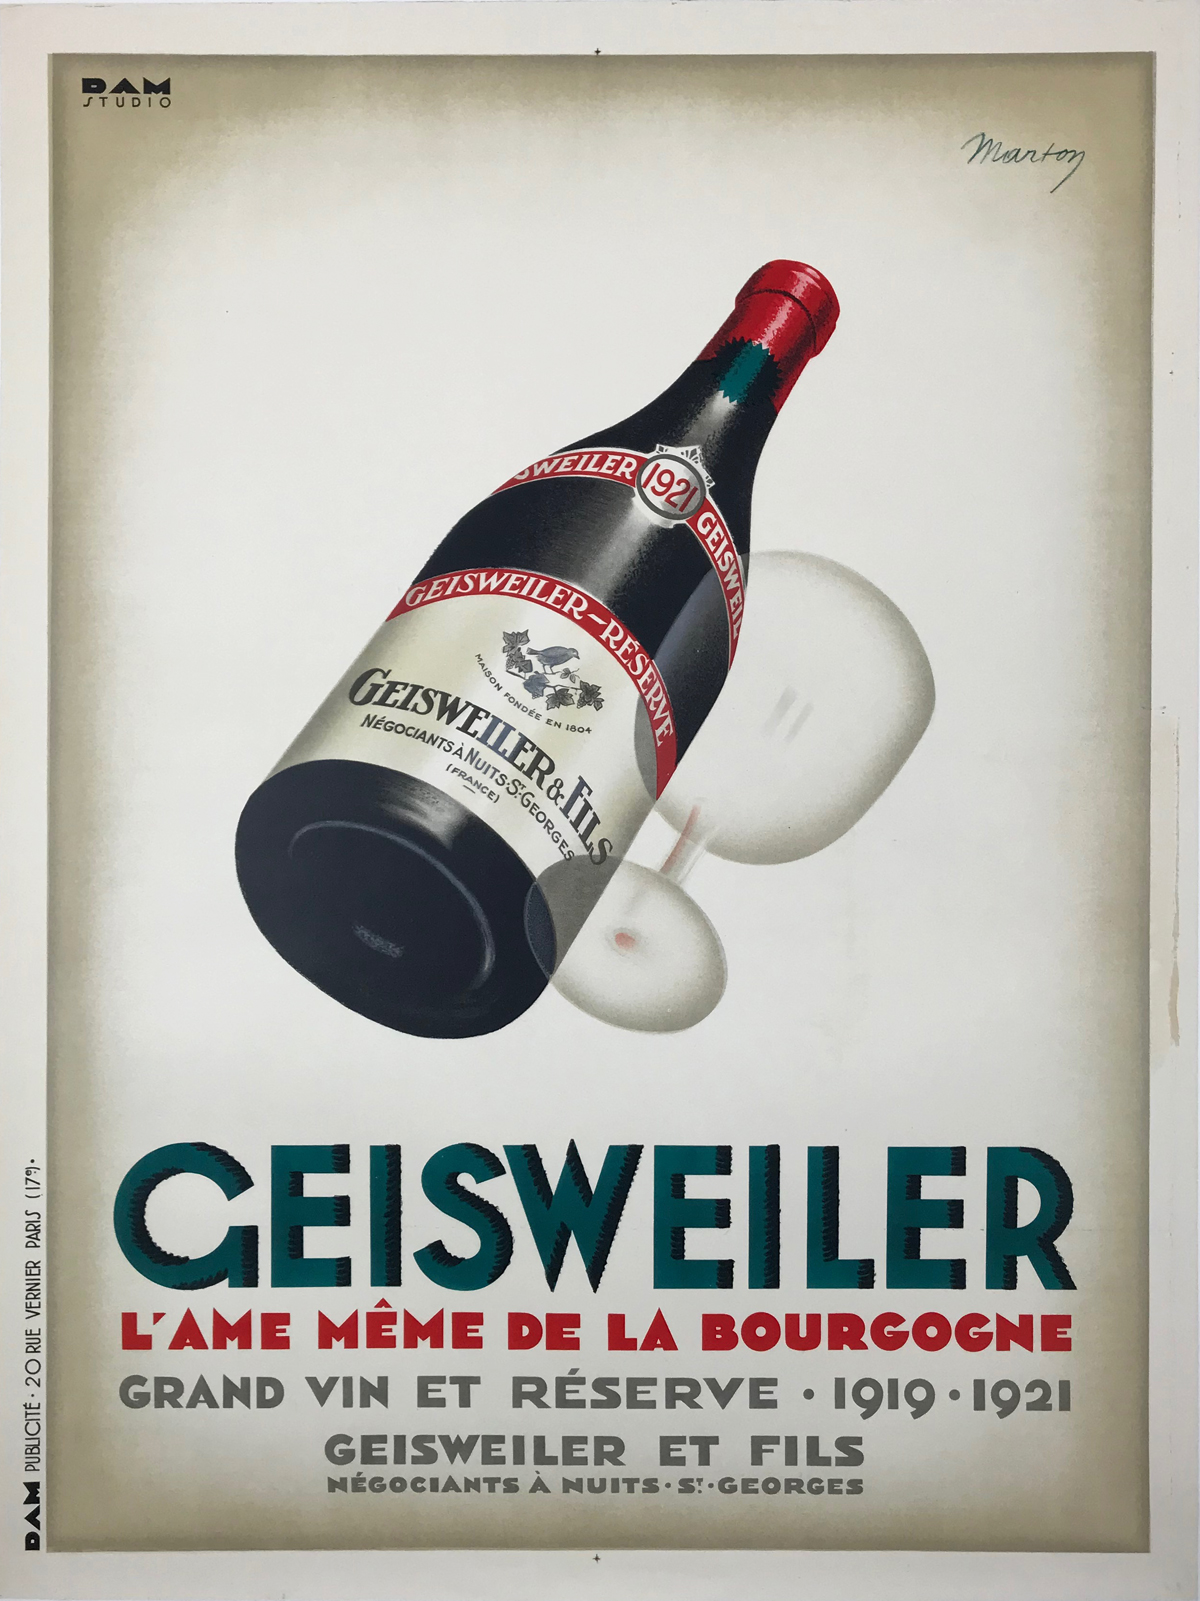 Geisweiler Grand Vin Marton Original 1921 Vintage Wine Company Advertisement Stone Lithograph Poster Linen Backed. "The Very Soul of Burgundy Great Wine and Reserve Traders from Nuits-Saint-Georges"...